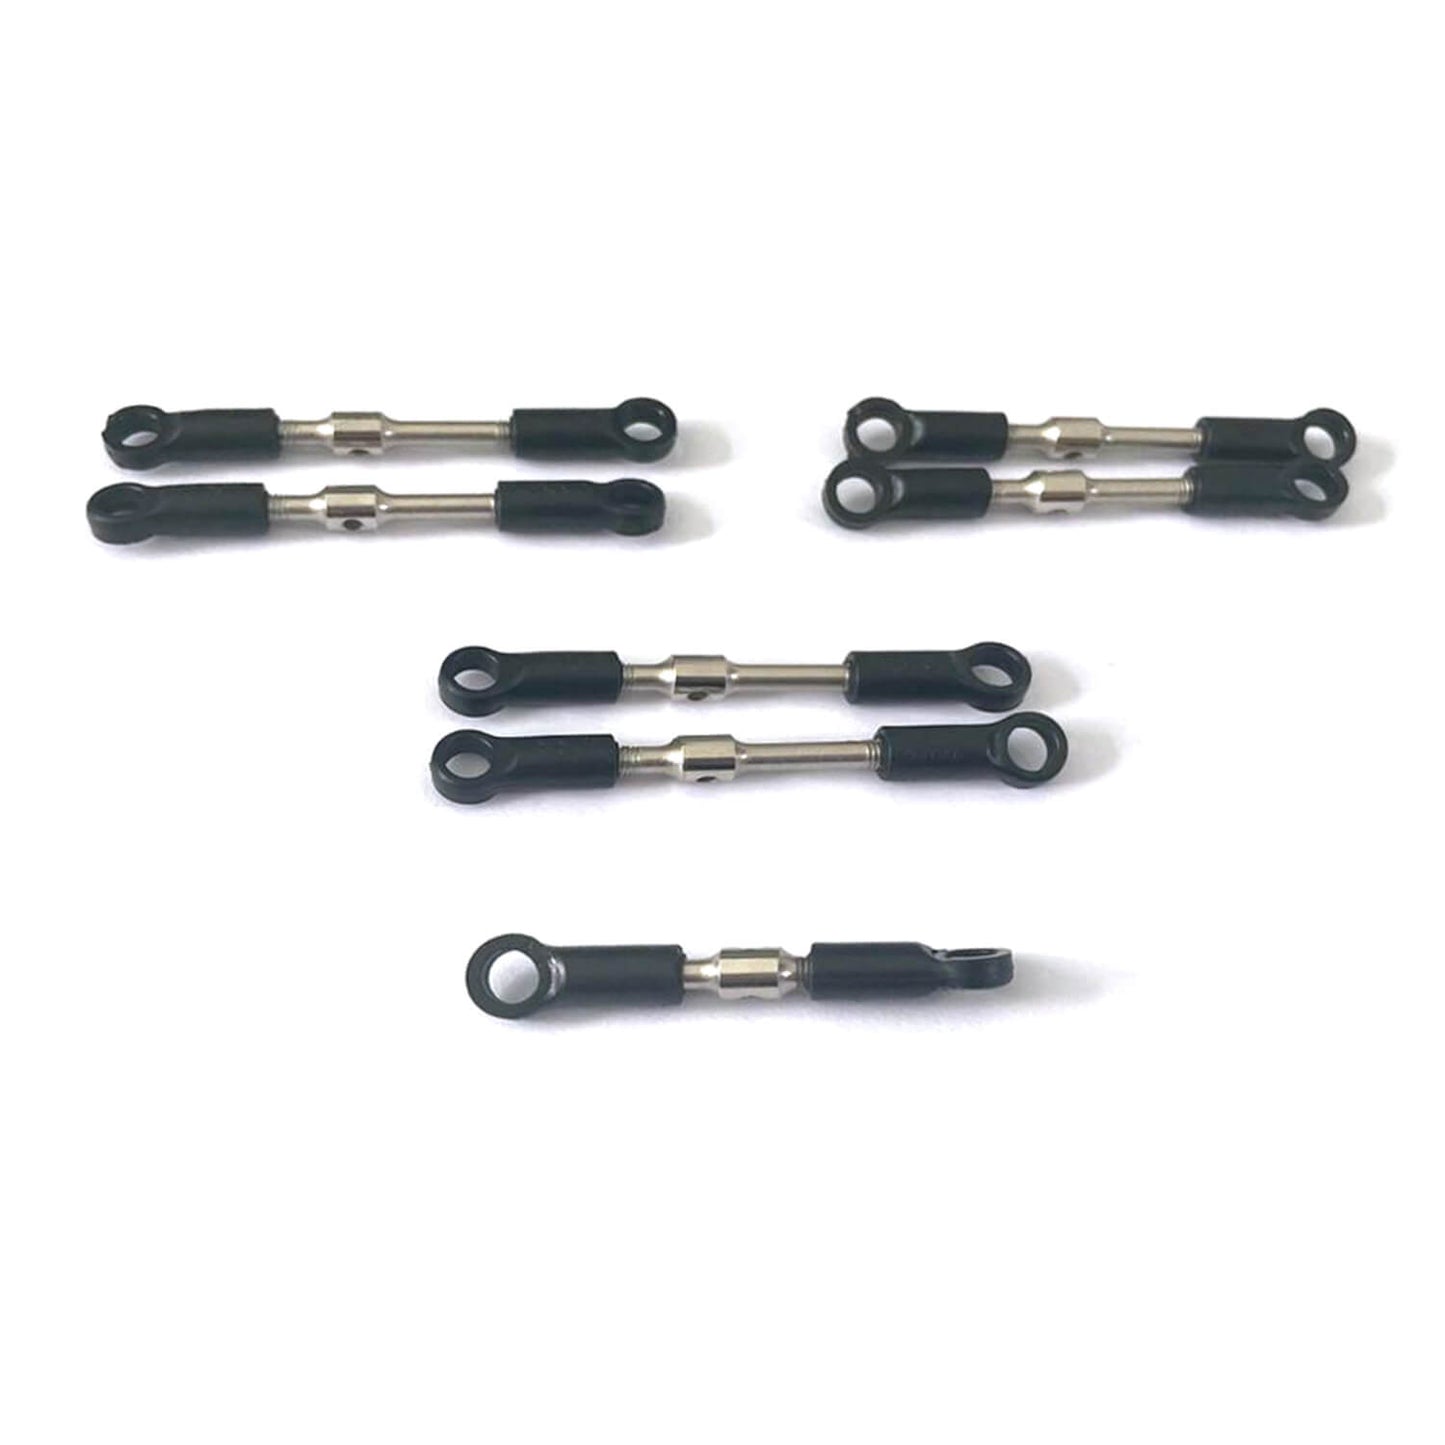 Rlaarlo Camber Links (7 PCS), 1/14 Buggy, for XDKJ-001 and XDKJ-006 Tie Rod Set, R0B20